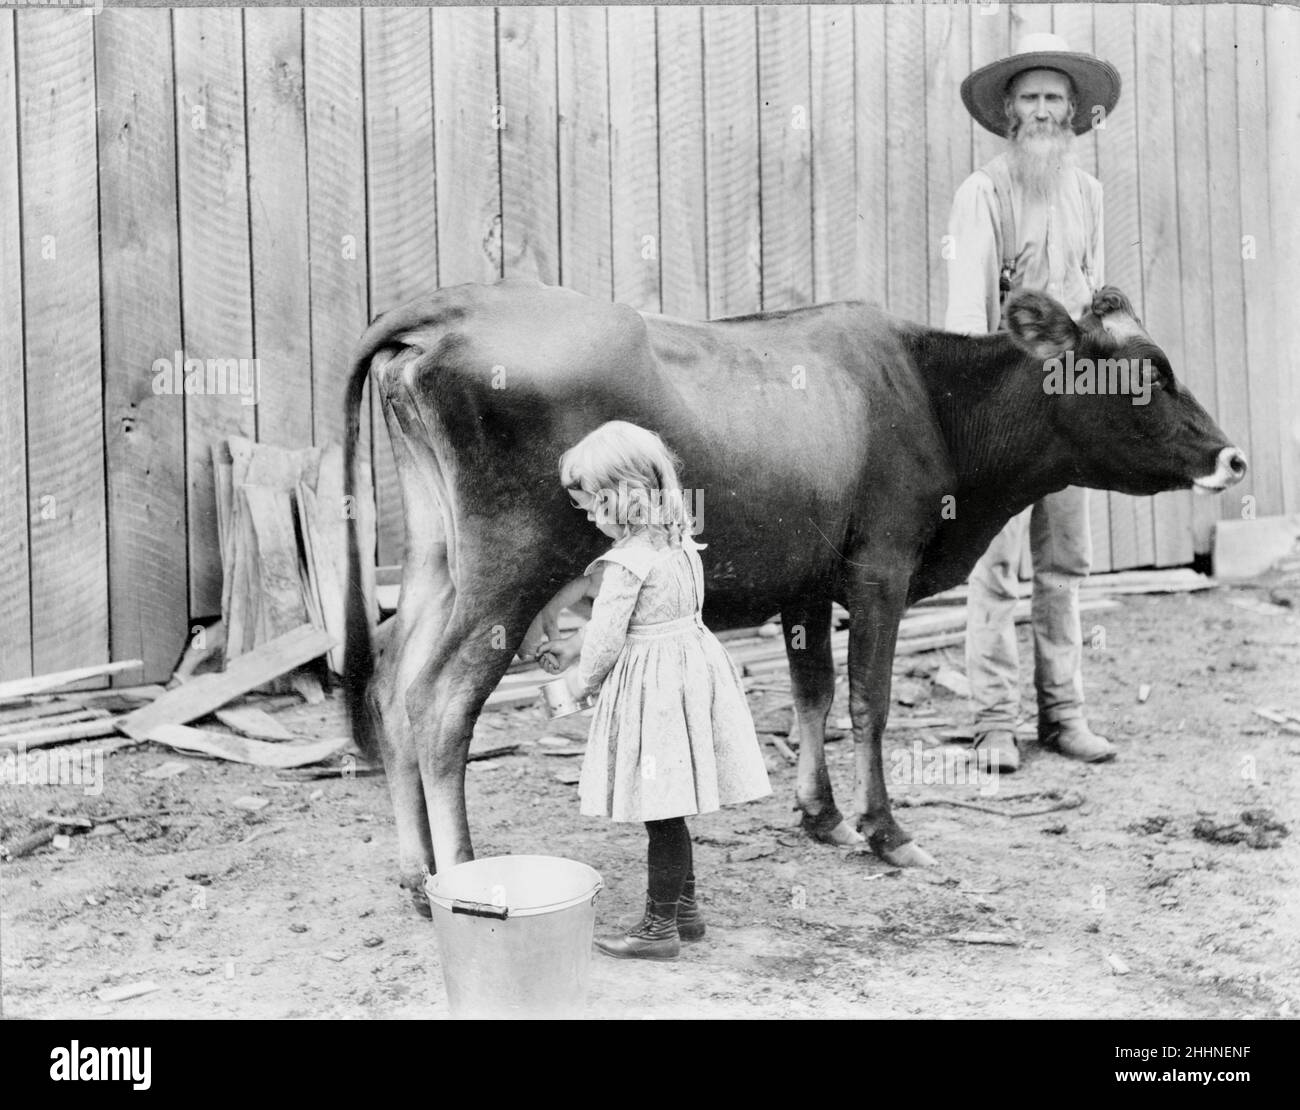 Retro vintage photograph of a young girl milking a cow with an elderly gentleman looking on. Stock Photo